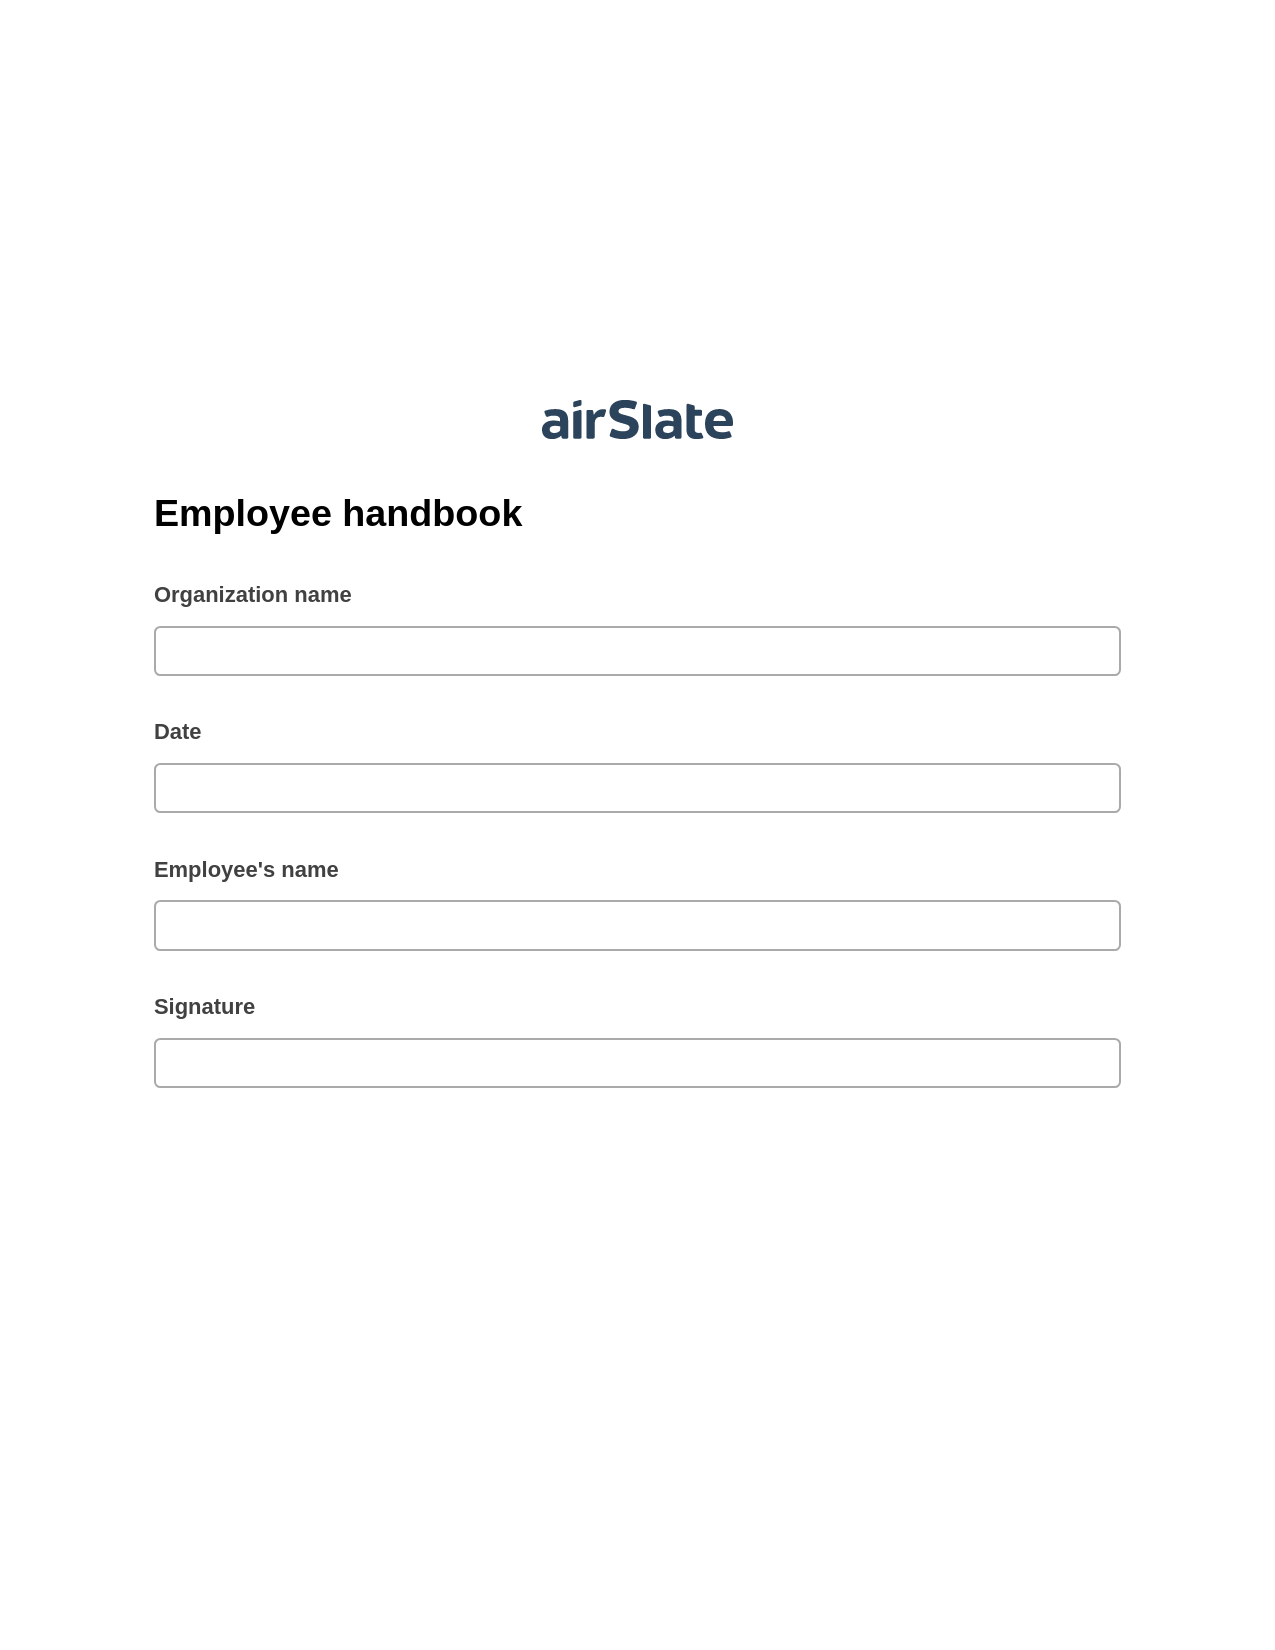 Employee handbook Pre-fill Dropdown from Airtable, Create Salesforce Record Bot, Export to NetSuite Record Bot